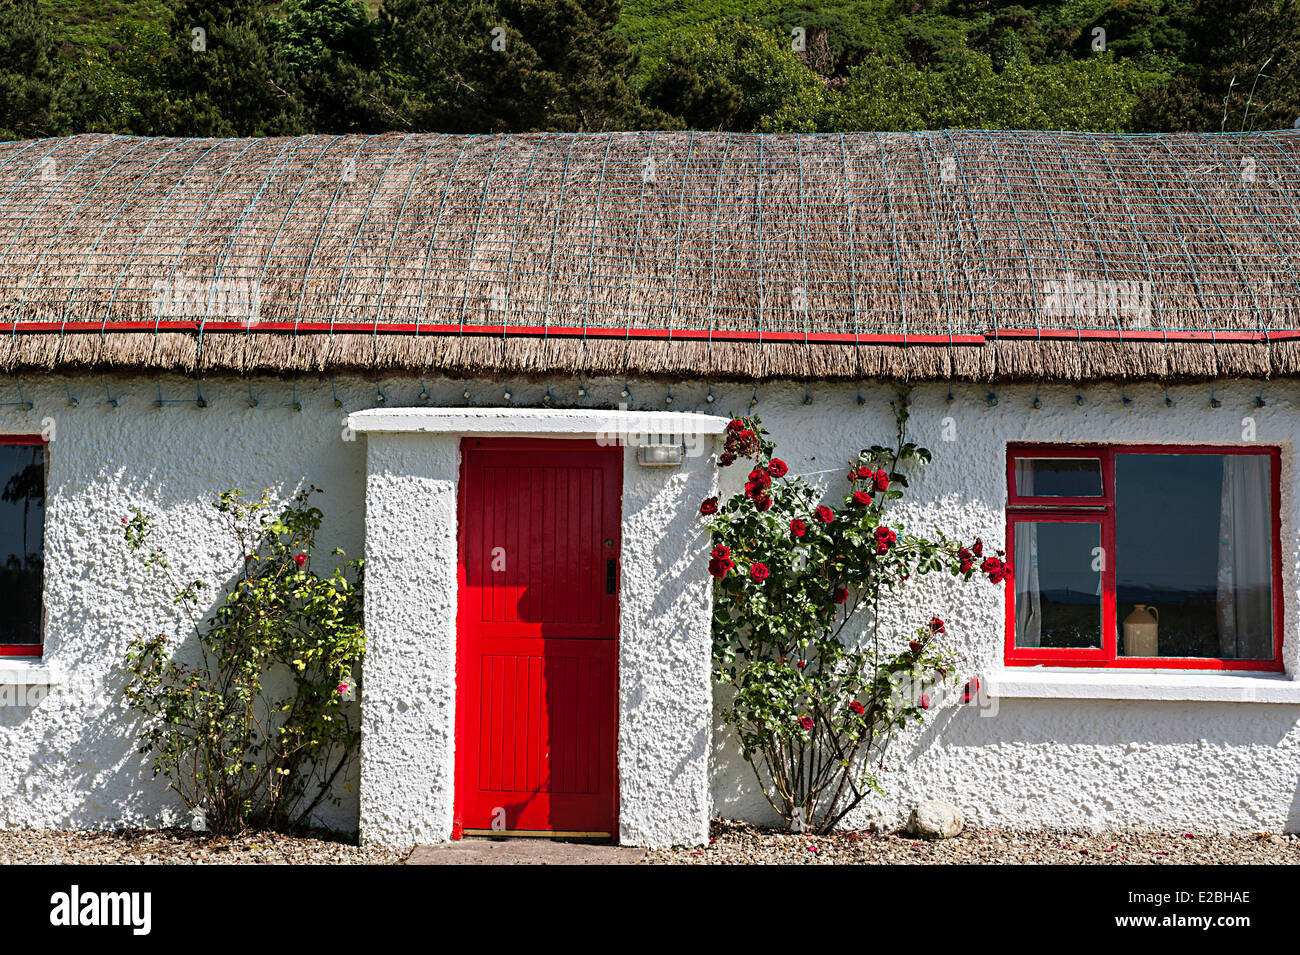 Irish Thatched Cottage Clonmany County Donegal Ireland Stock